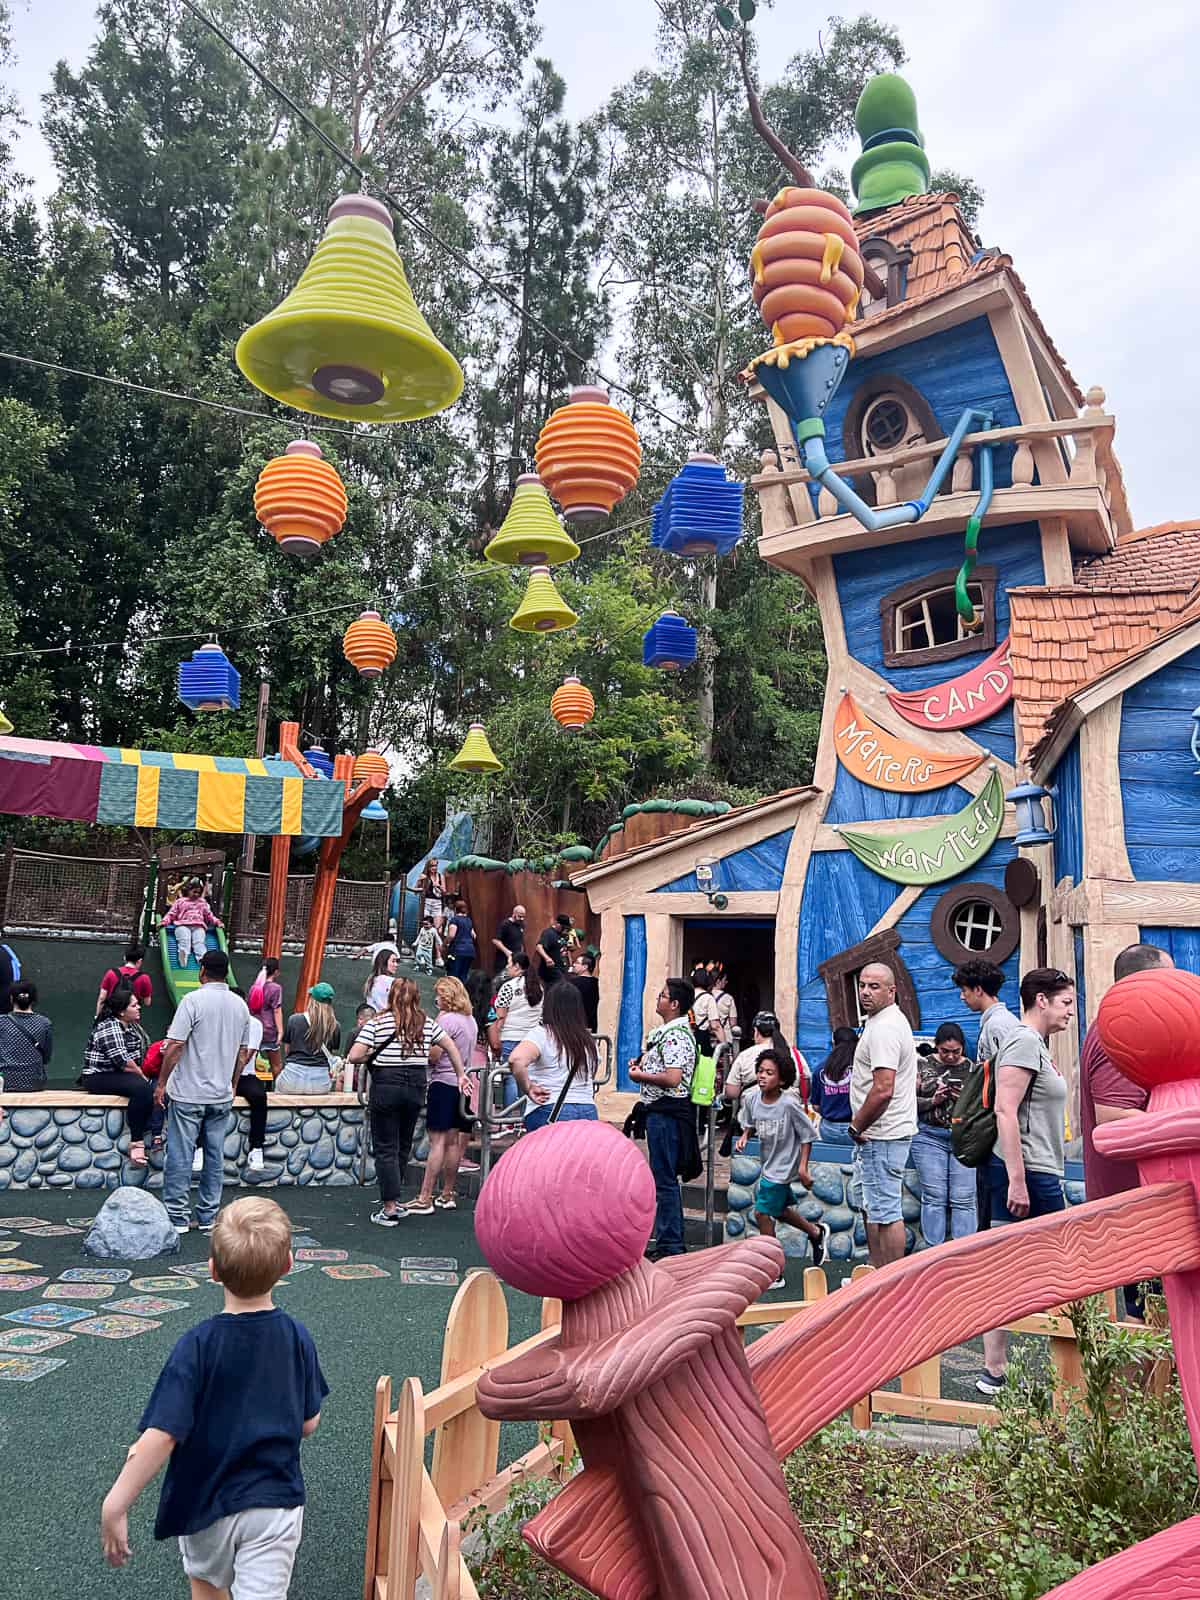 View of playground area at Mickey's Toontown in Disneyland